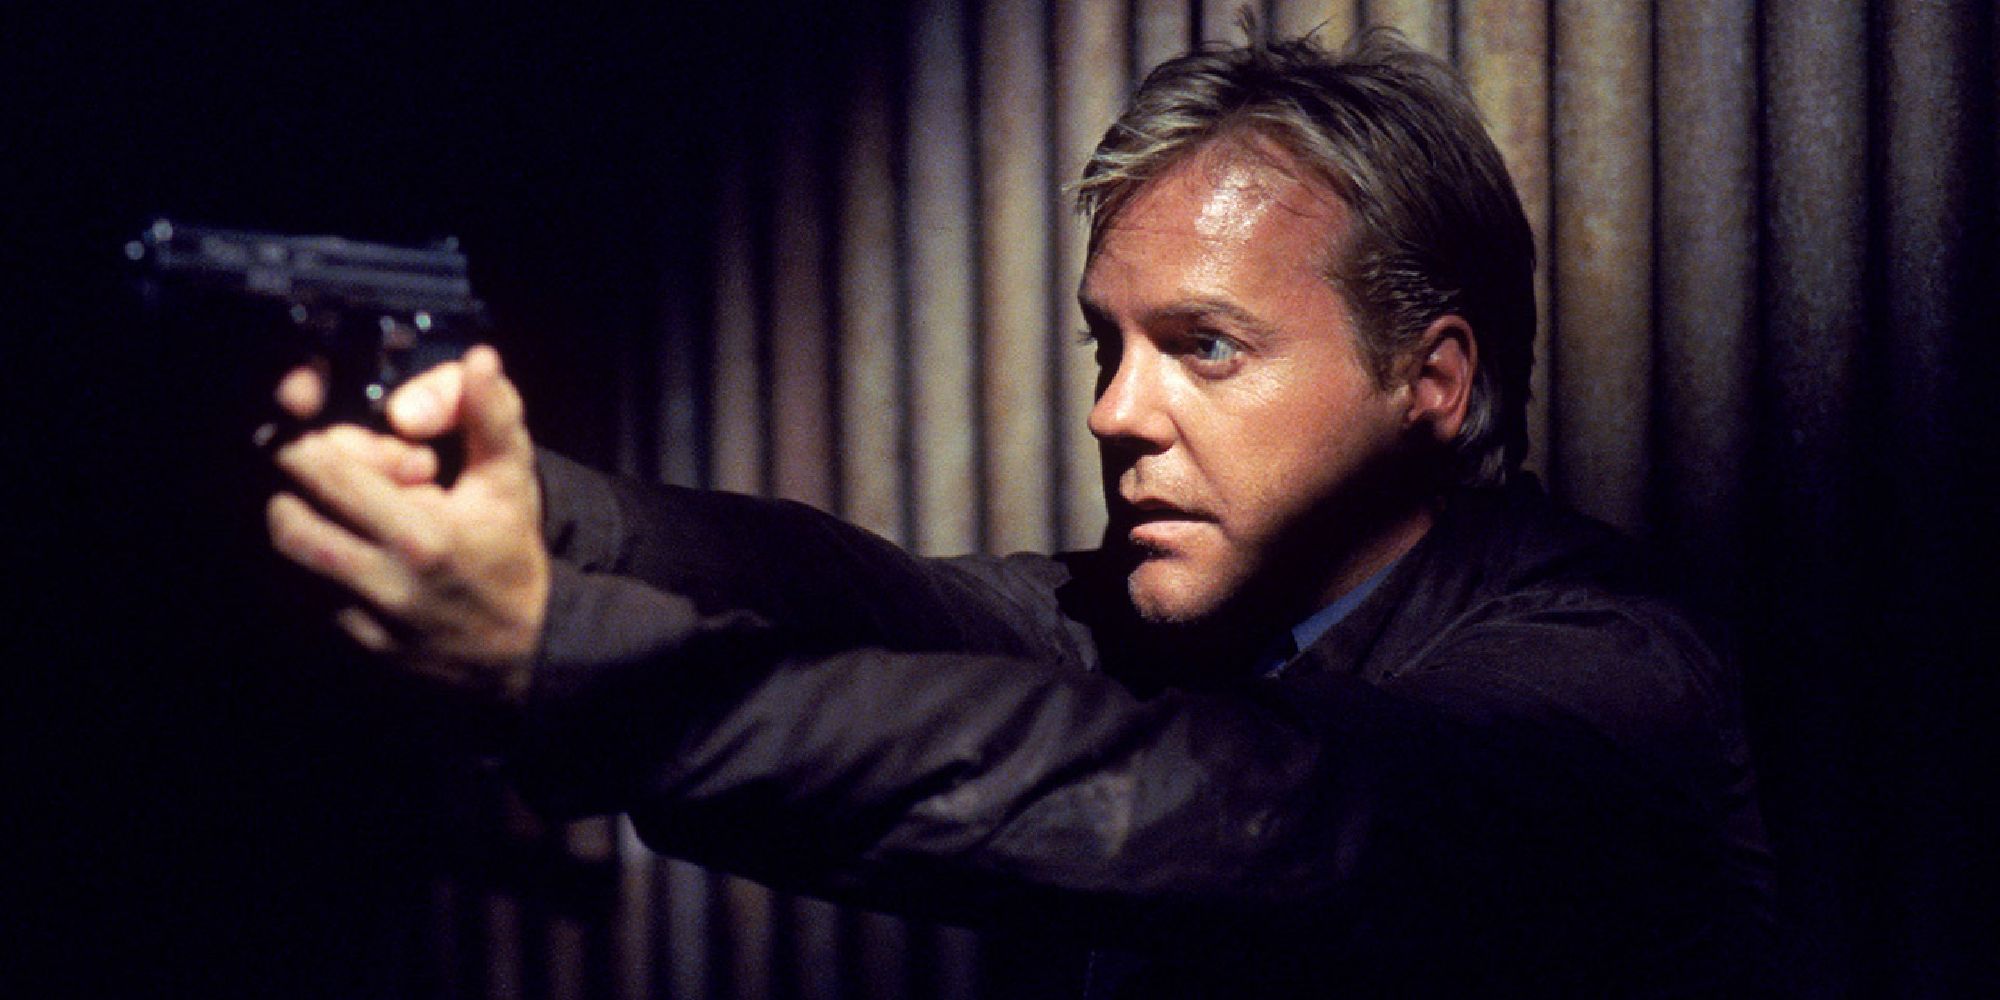 Jack Bauer, played by Kiefer Sutherland, pointing a gun in the first season of 24.